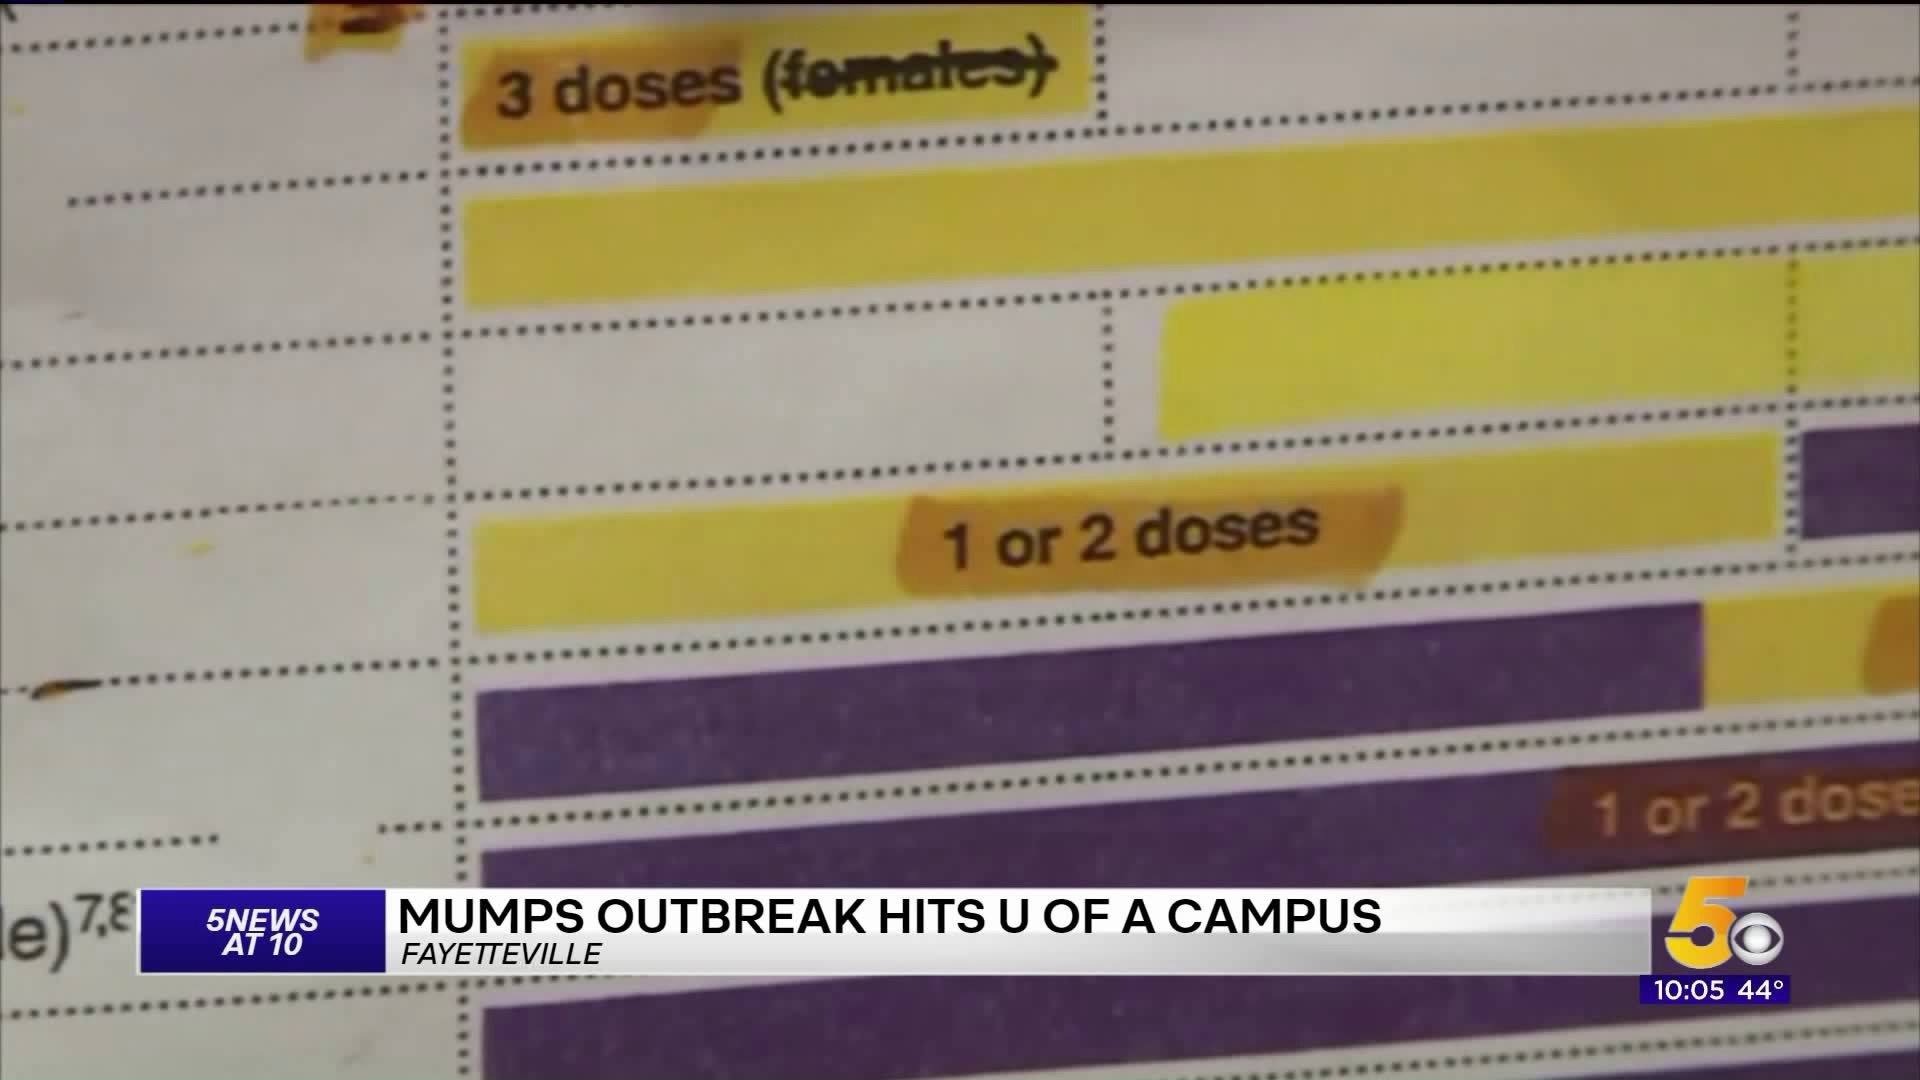 Mumps Outbreaks Hits the U of A Campus